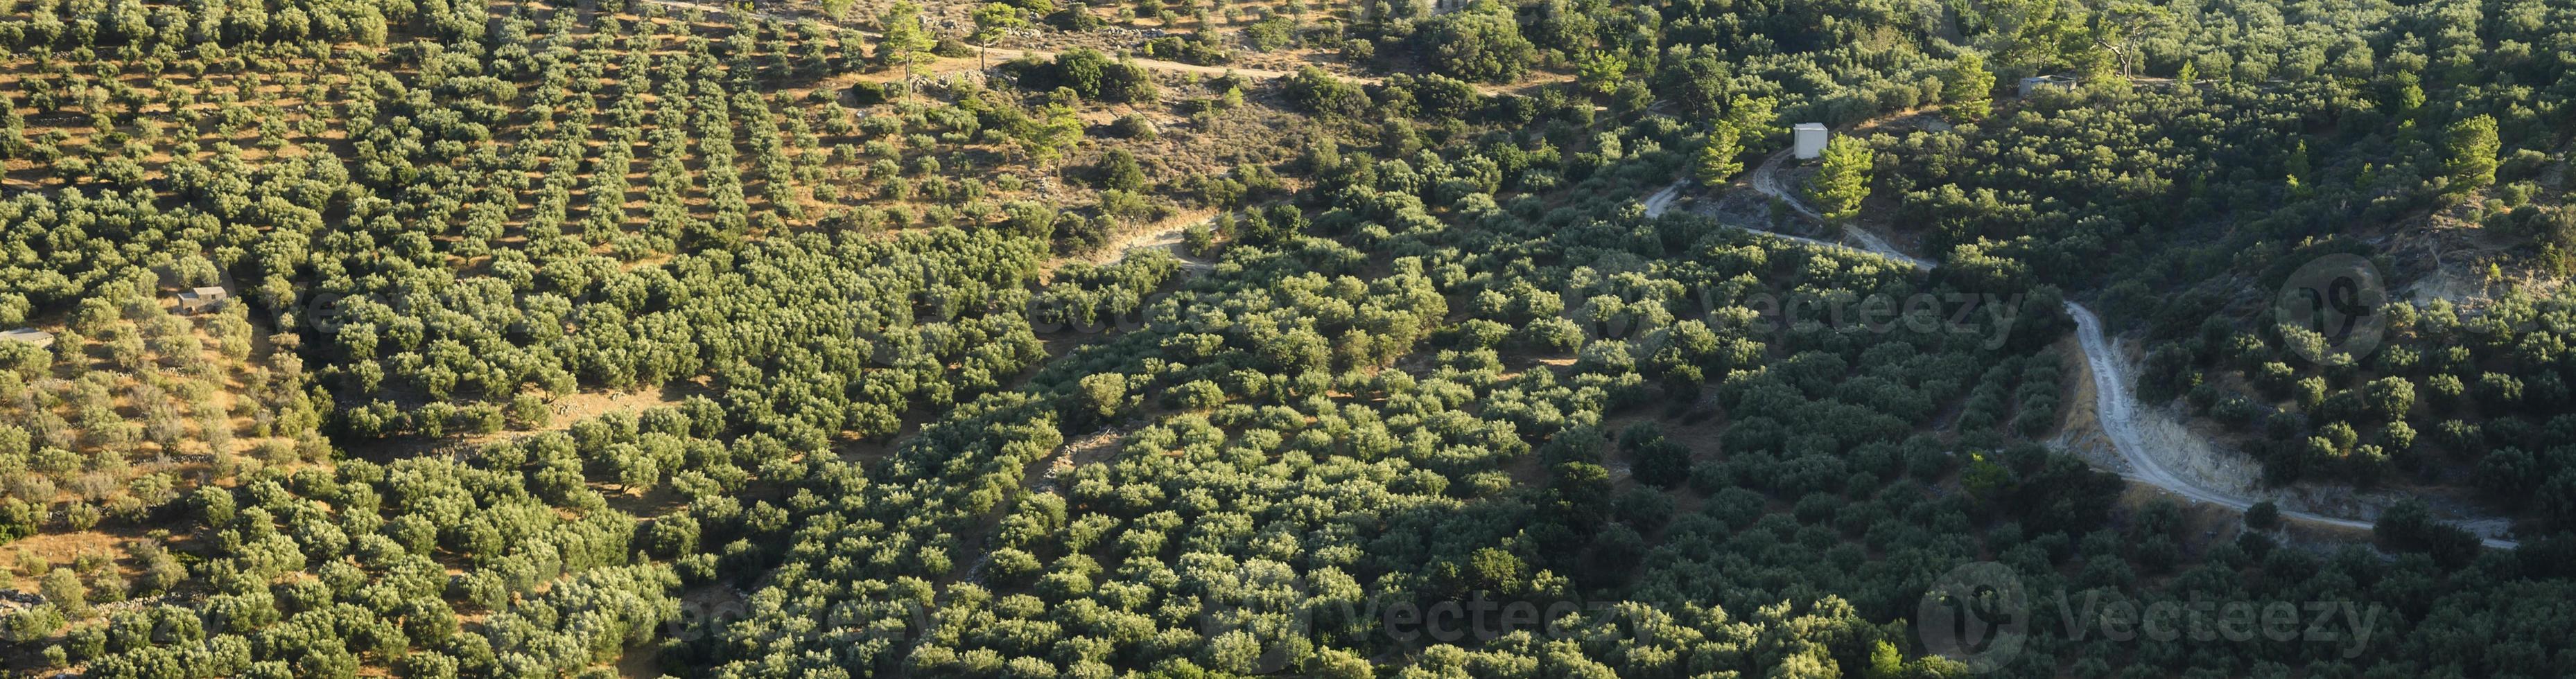 Fields with olive tree plantations in the mountains of the island of Crete photo